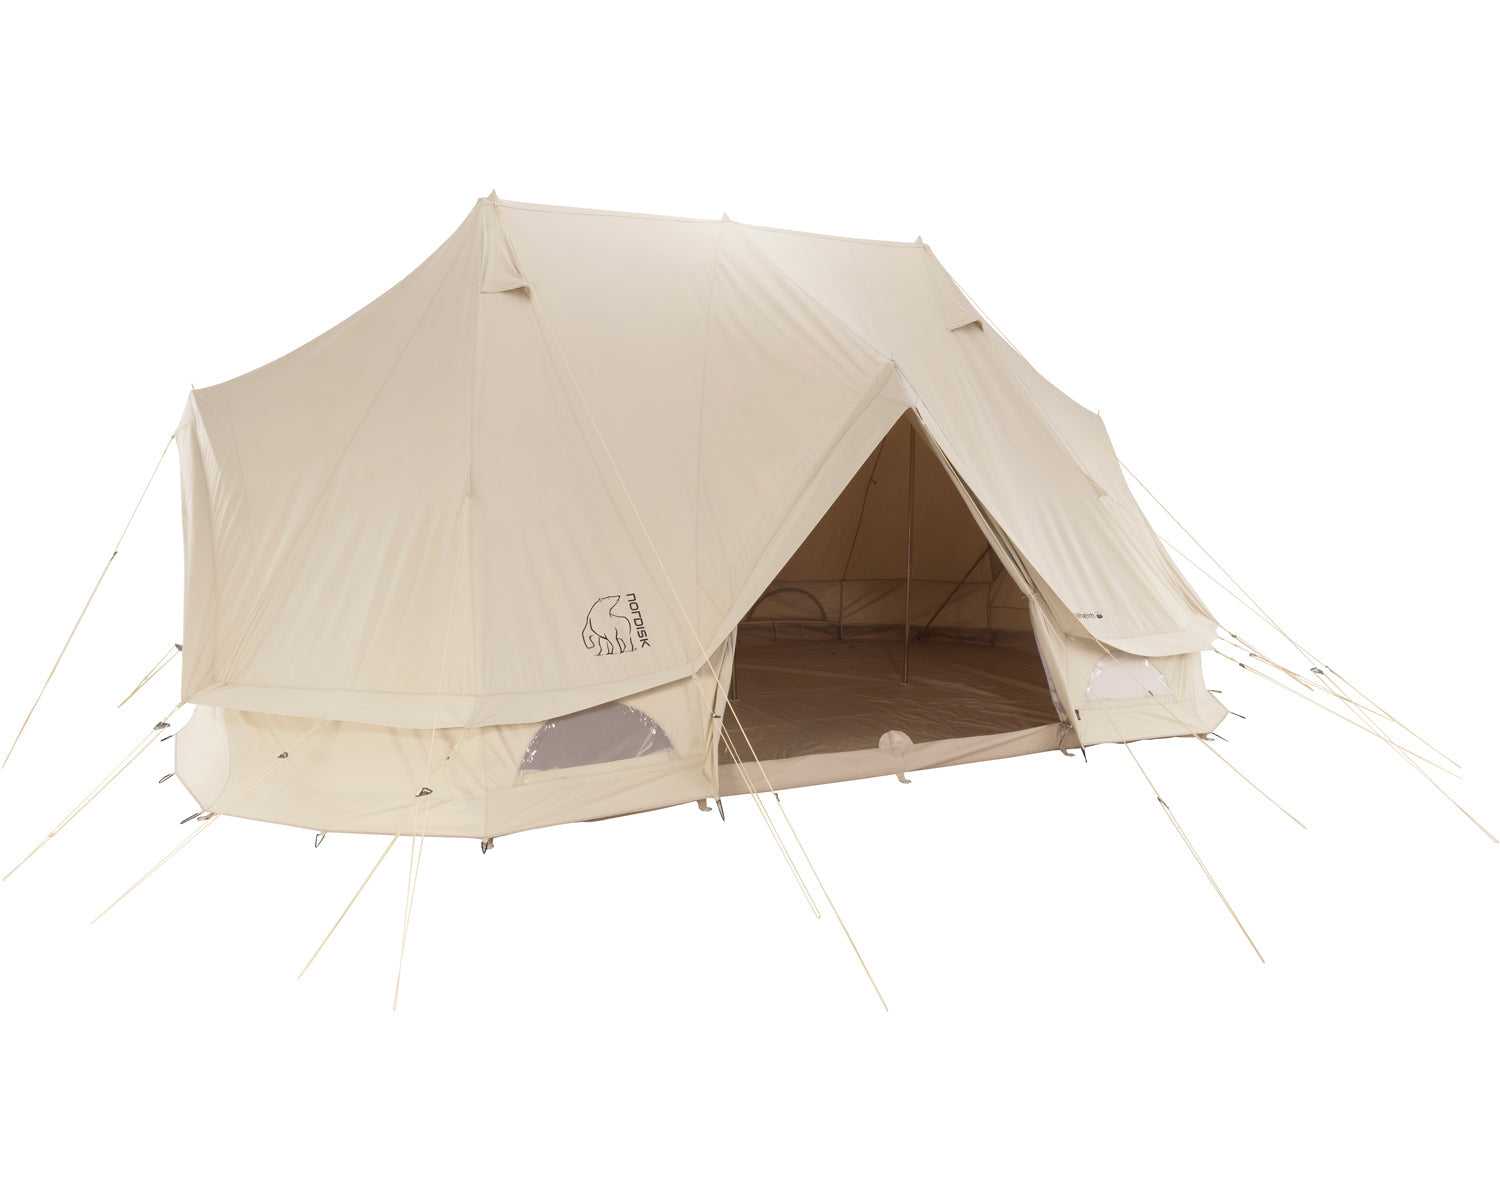 Vanaheim 40 m² glamping tent - 16 person - Natural